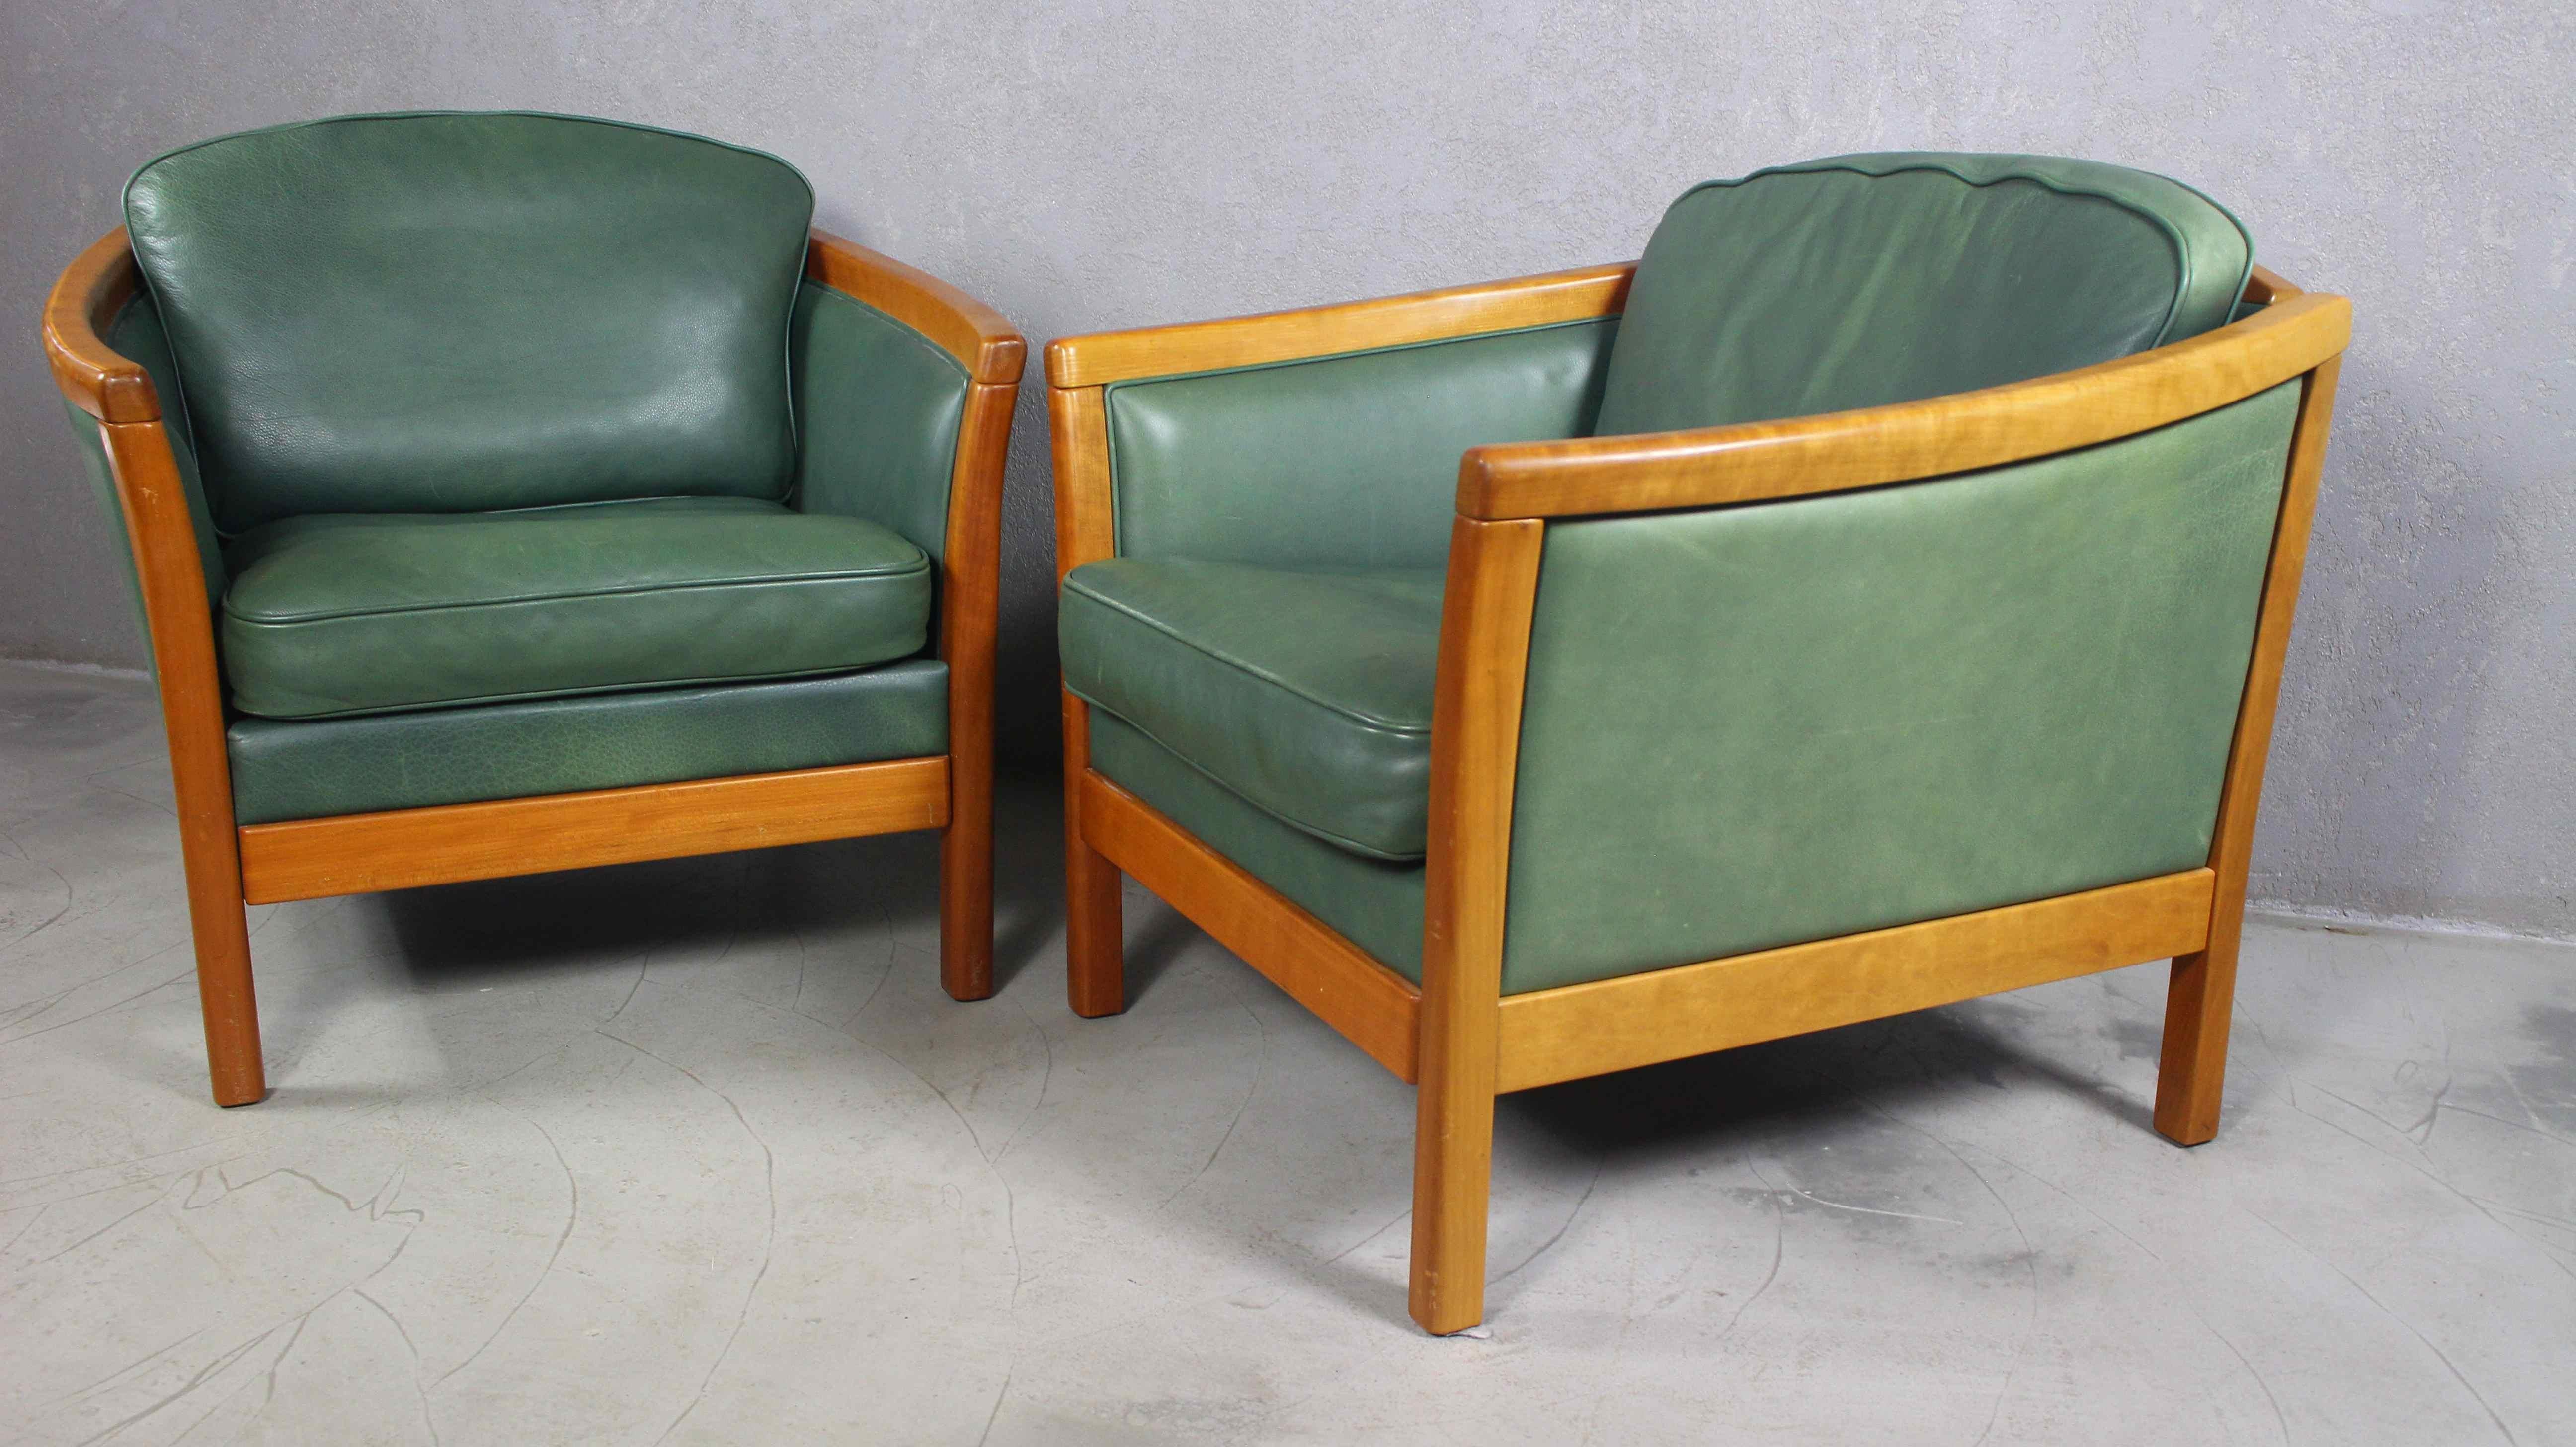 Mogens Hansen Green Leather Lounge Chairs, Denmark, Set of 2 For Sale 2